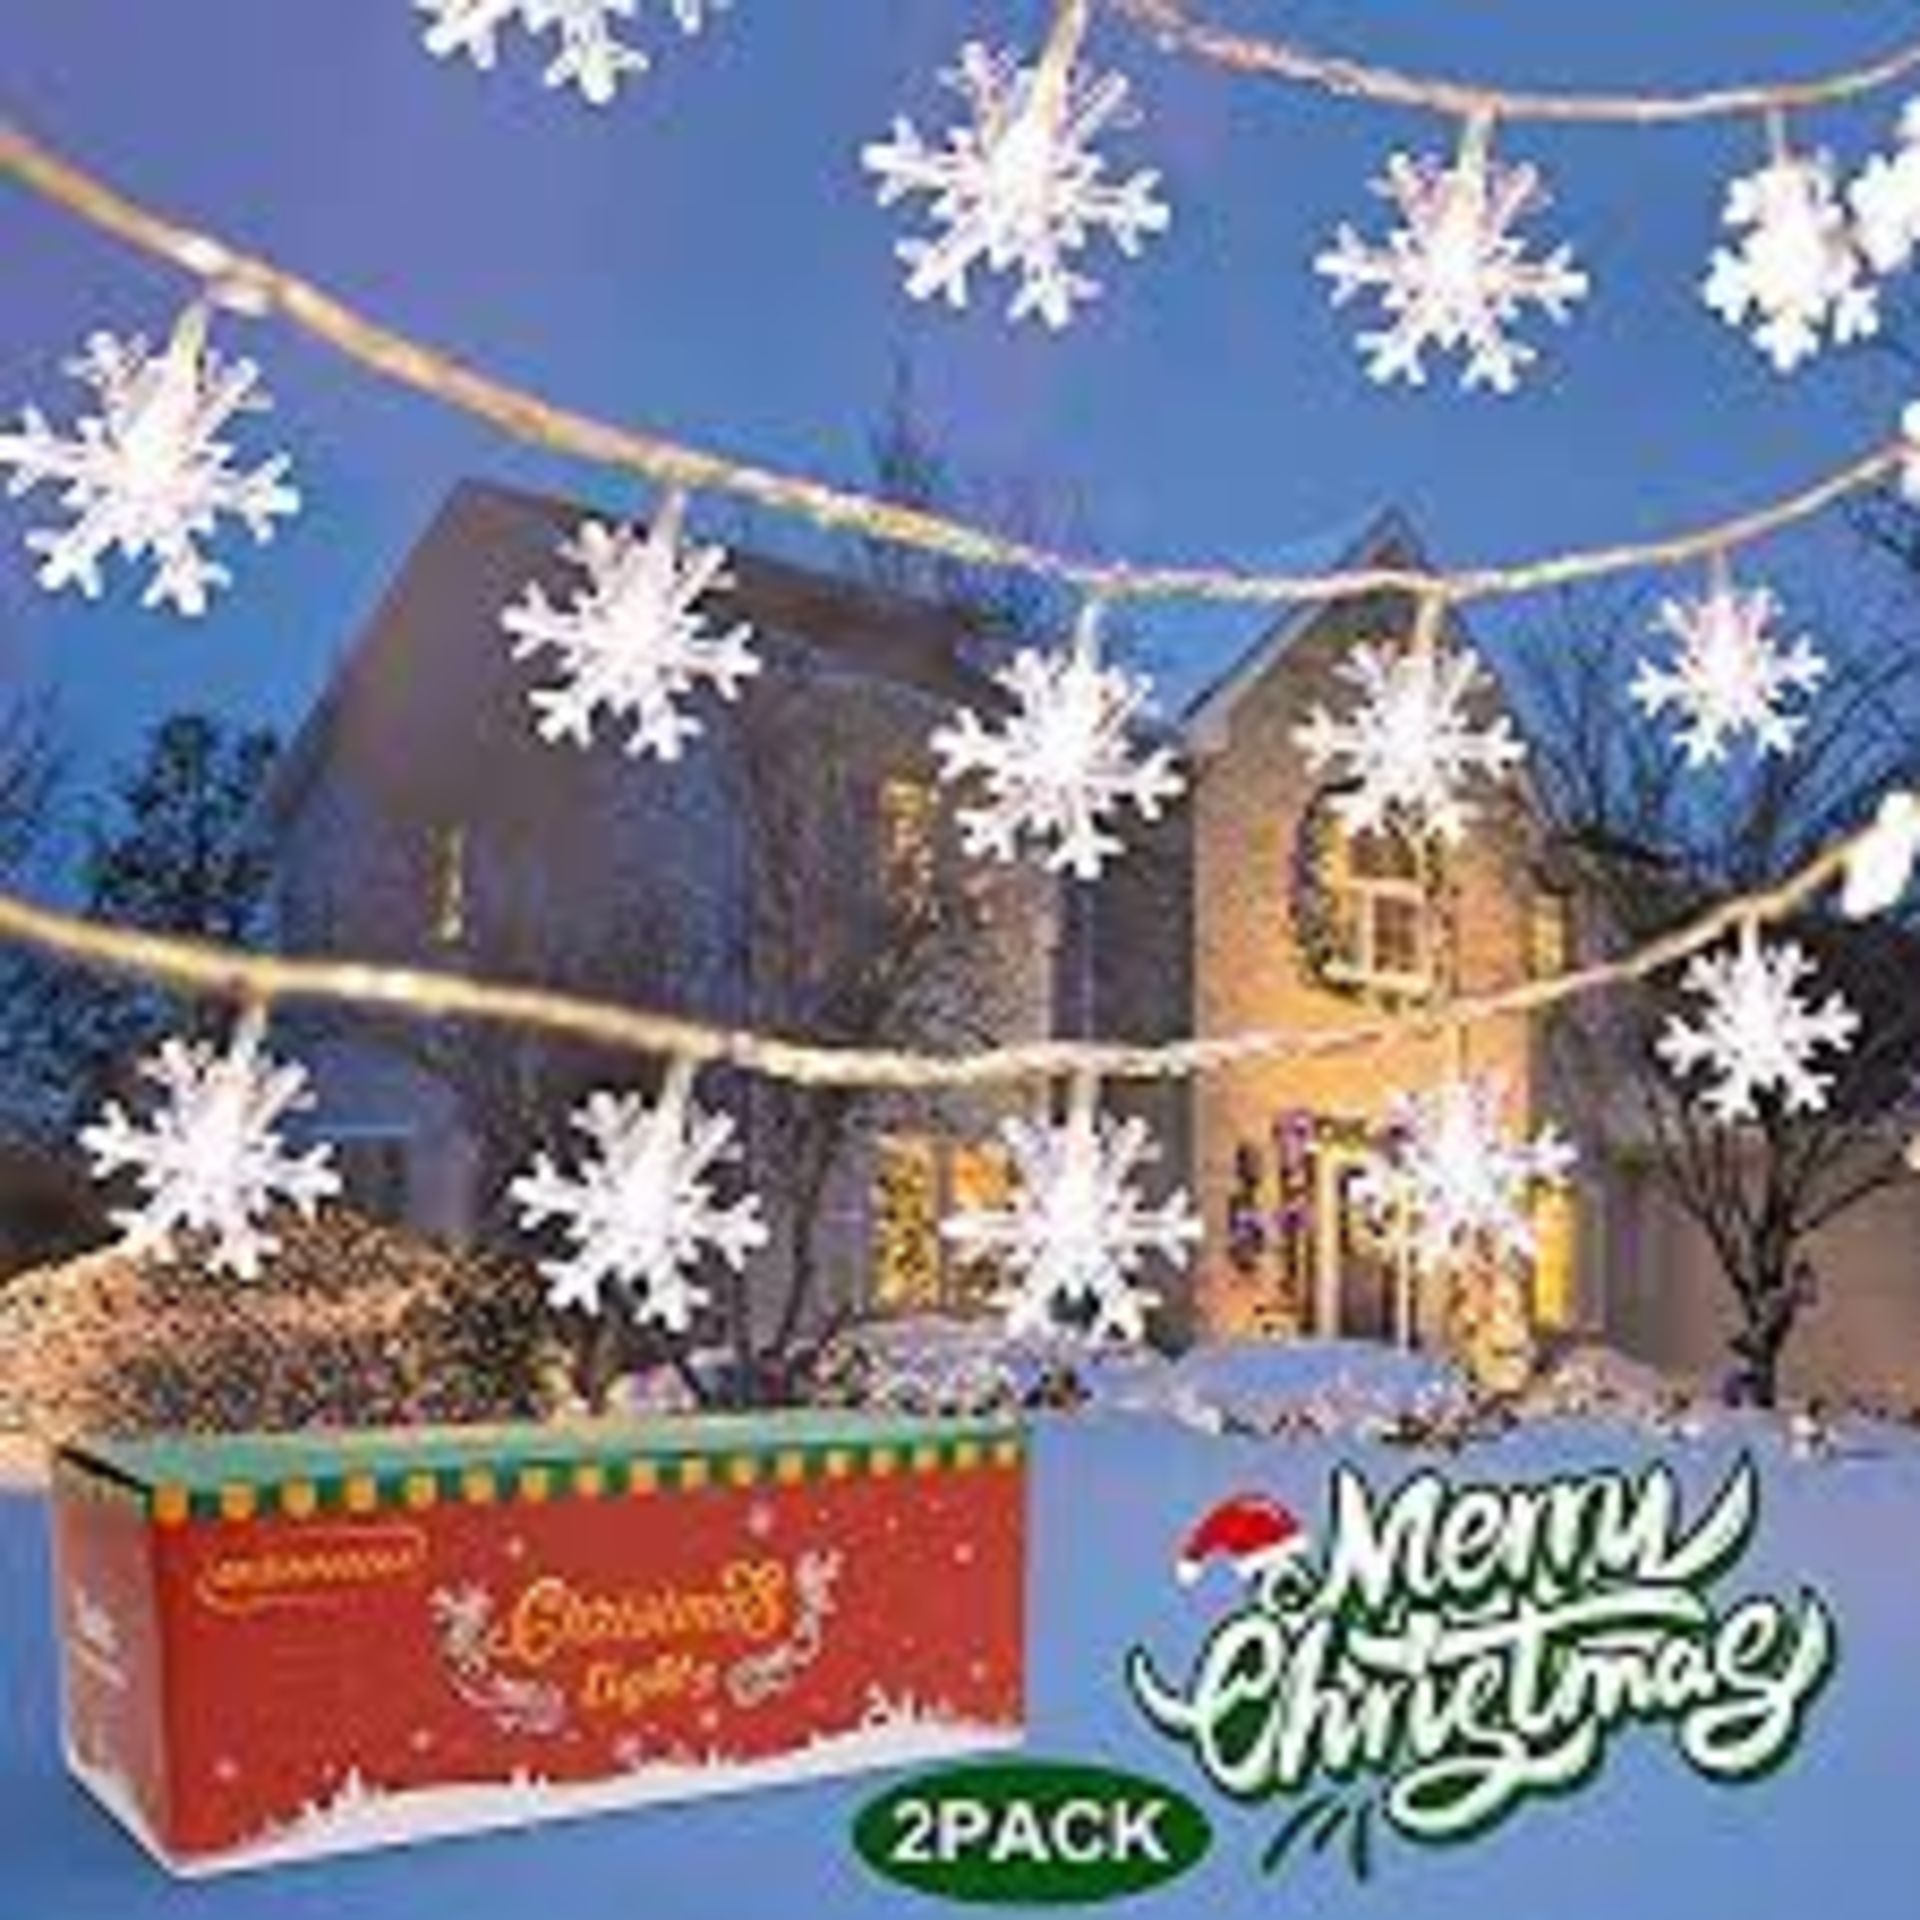 TRADE LOT 100 x NEW BOXED BANNILU 80LED 40ft Snowflake String Lights Battery Operated Waterproof